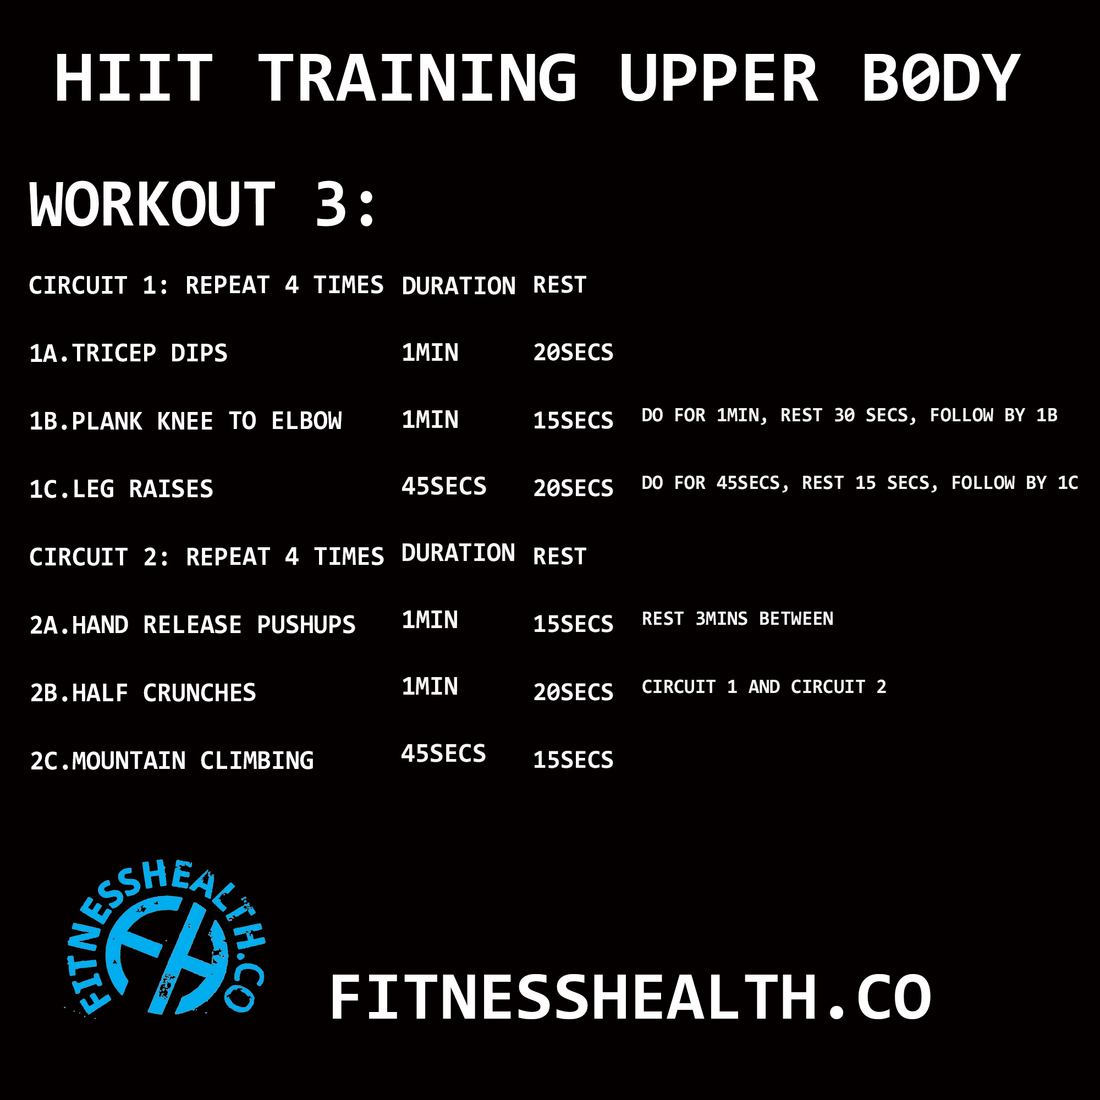 HIIT Training Workout 3 Upper Body - Fitness Health 